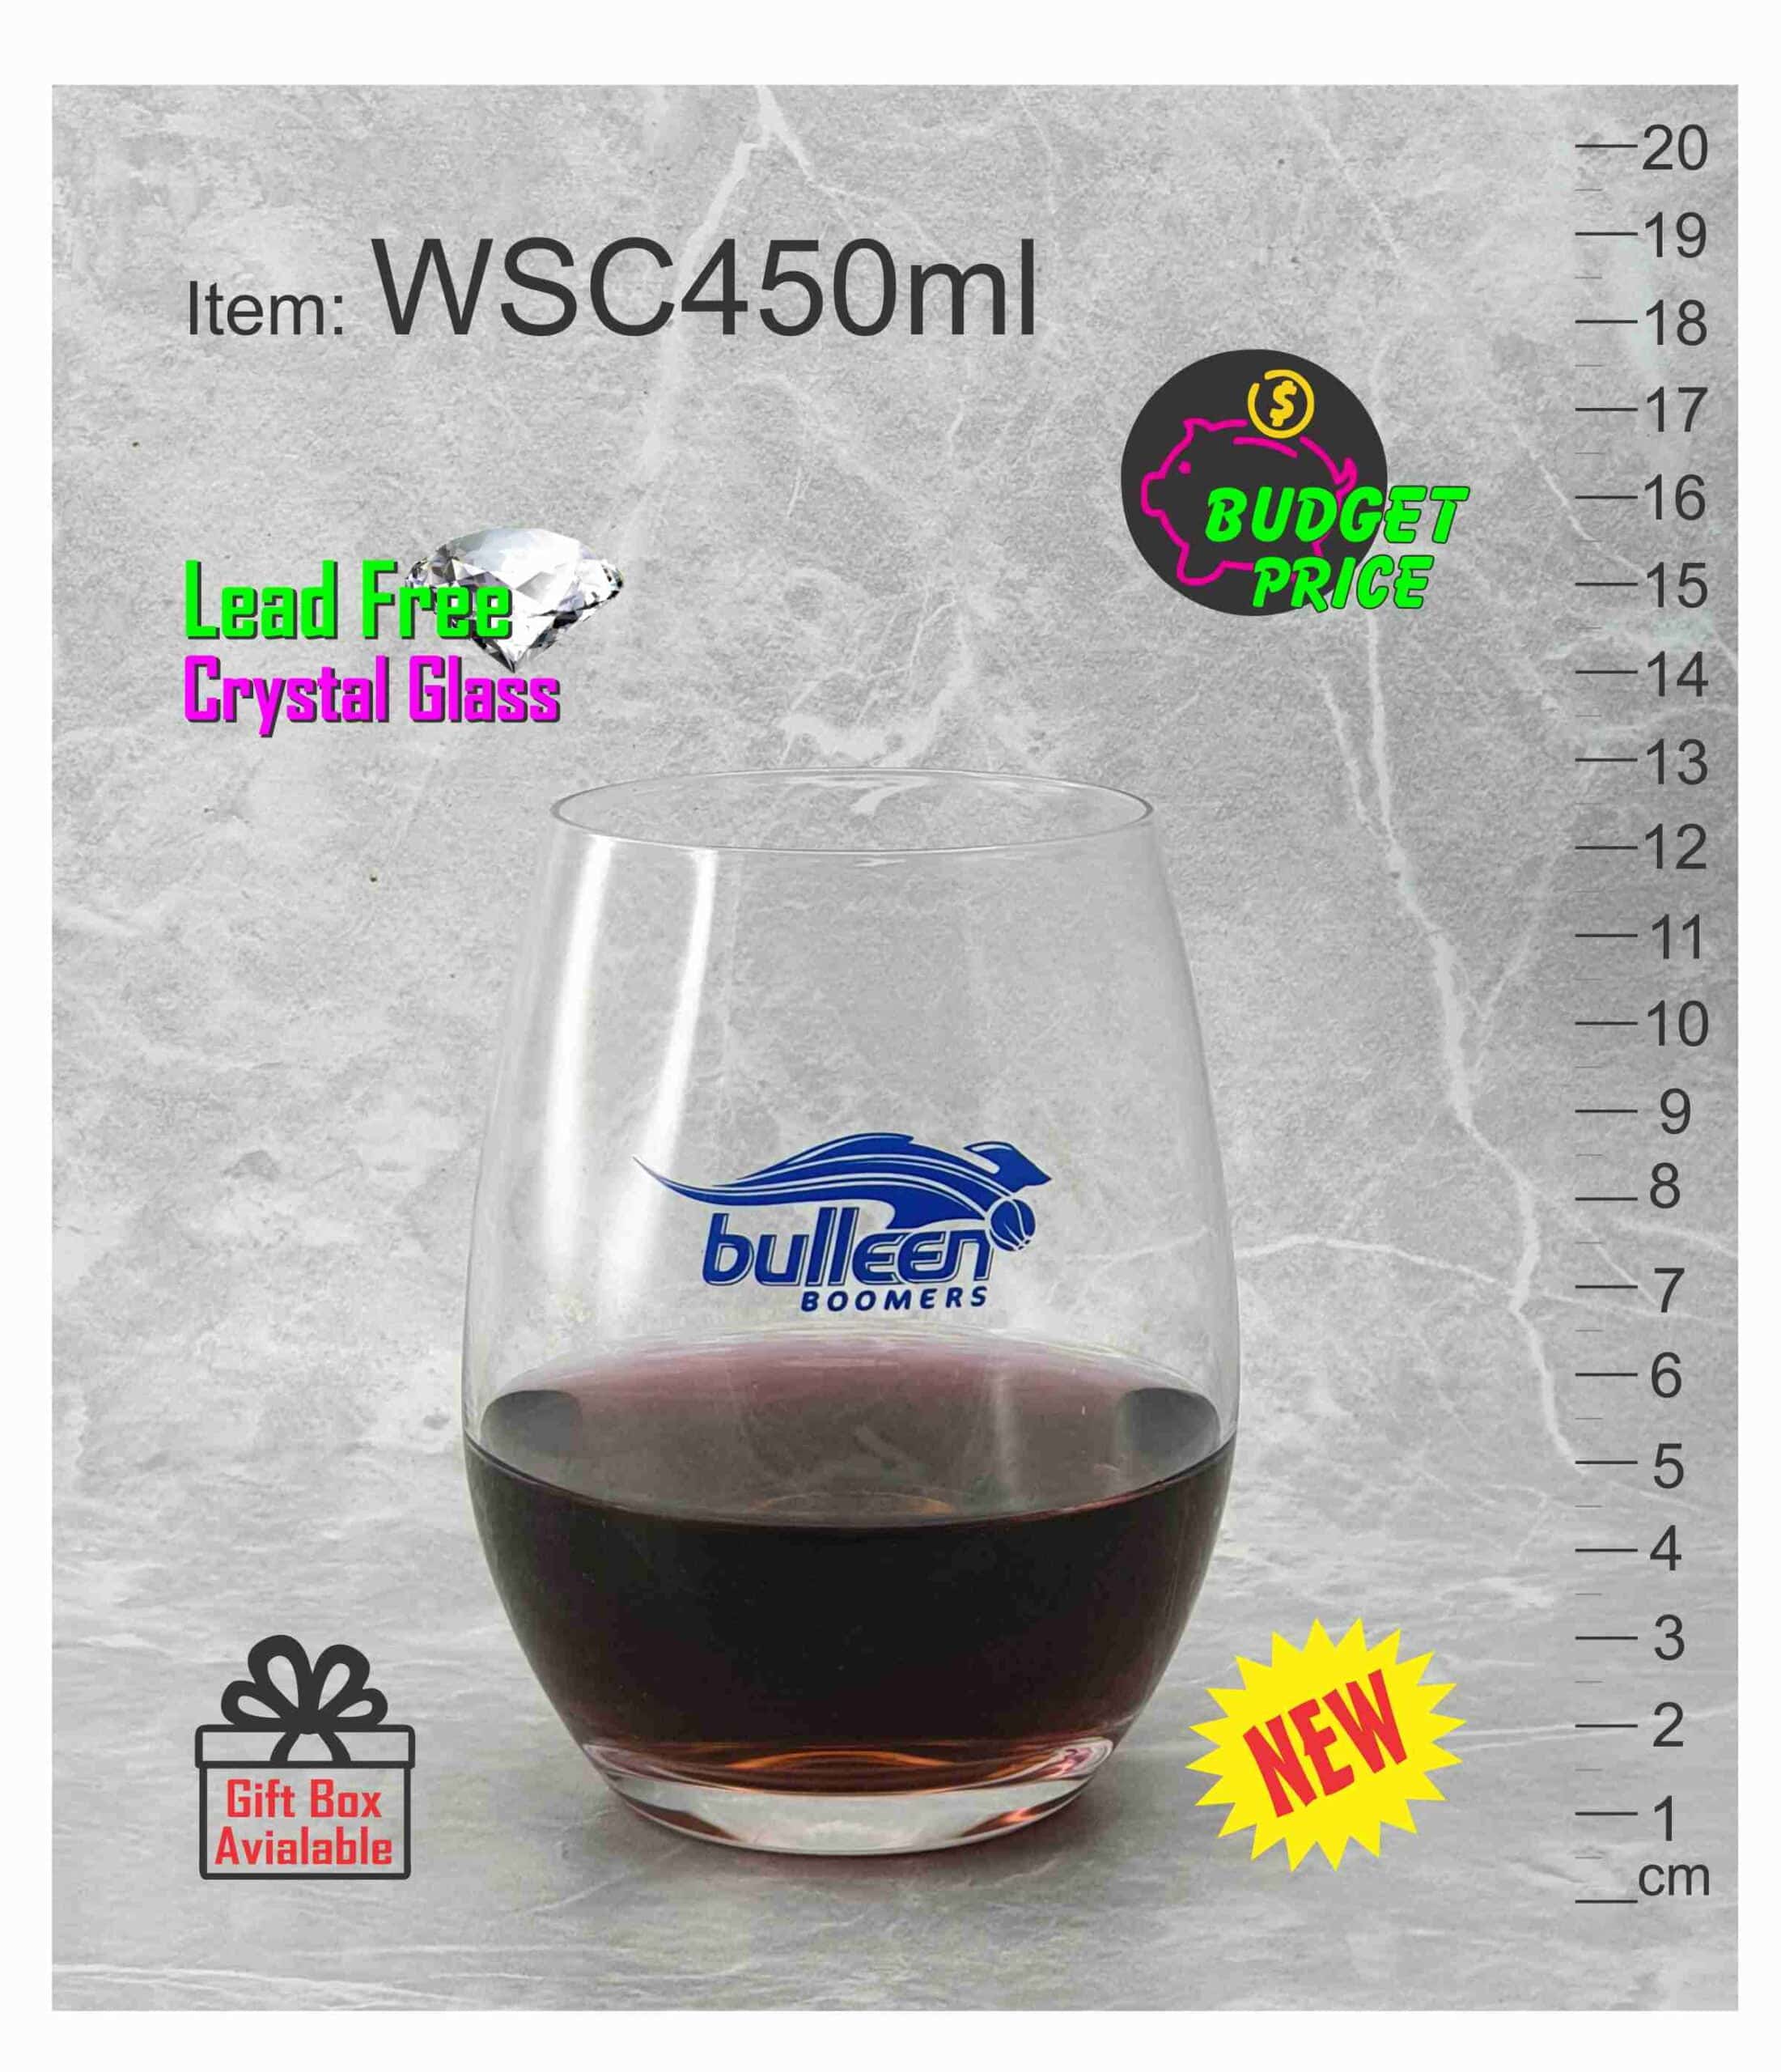 WSC450-blue-decal-print-decorated-white-wine-low-cost-cheap-cup-universal-crystal-glass-event-festival-Australia-abc2000